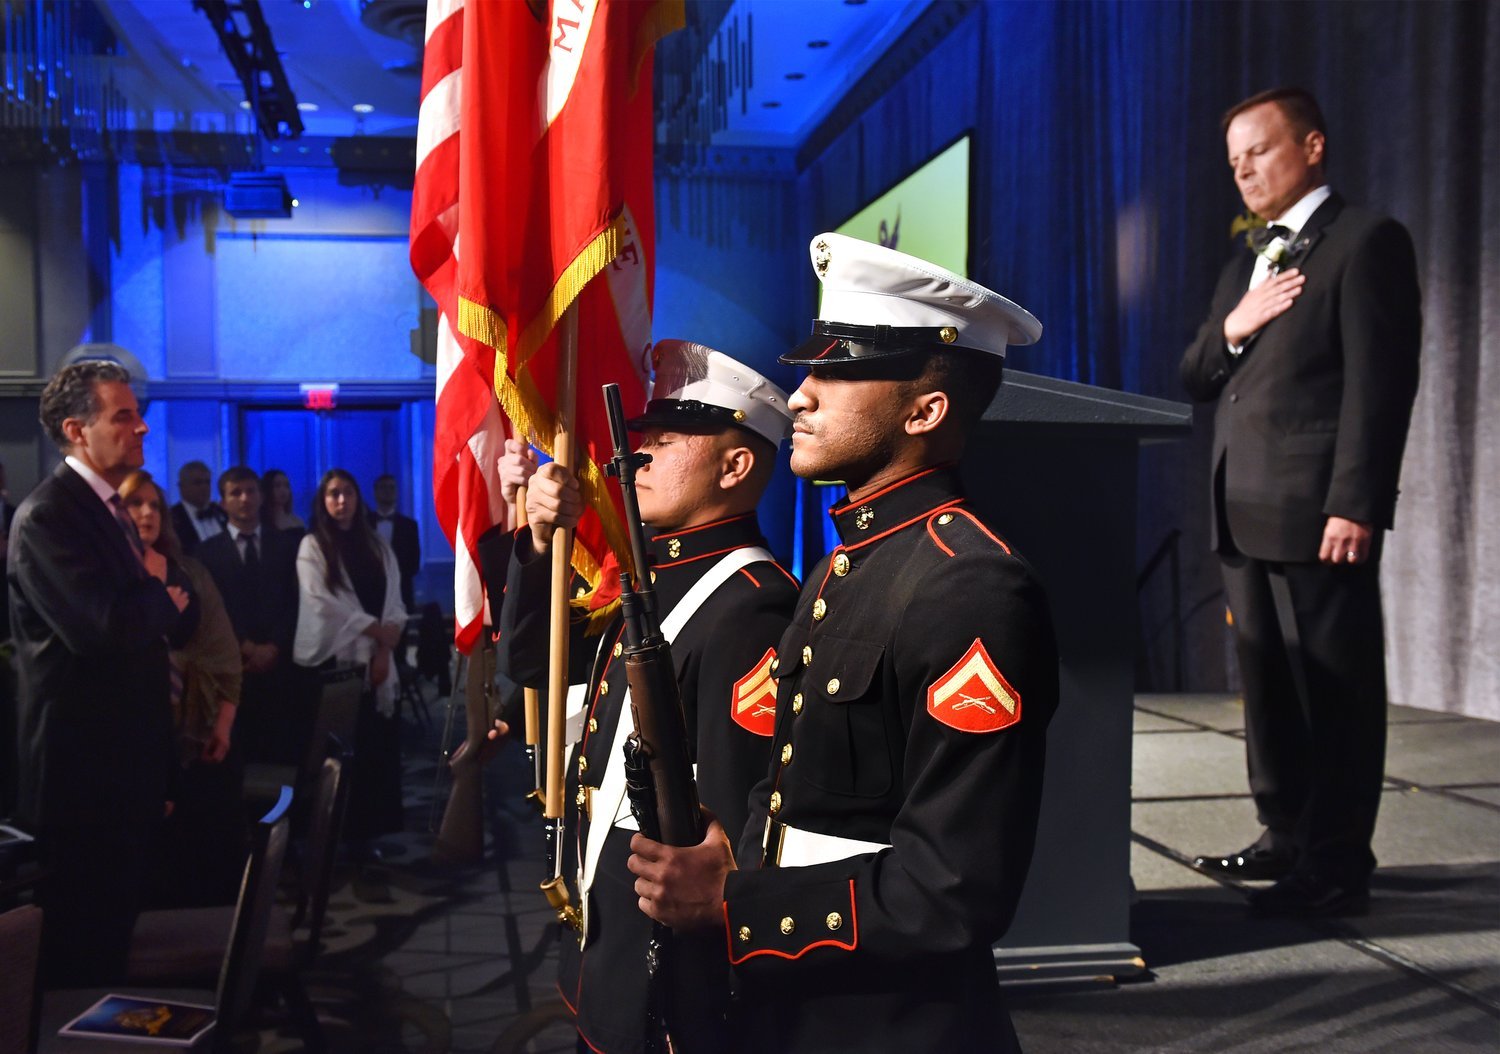  The United States Marine Corps Color Guard presents the colors during the United States National Anthem at the 50th Anniversary Hellenic Heritage and National Public Service Awards. 